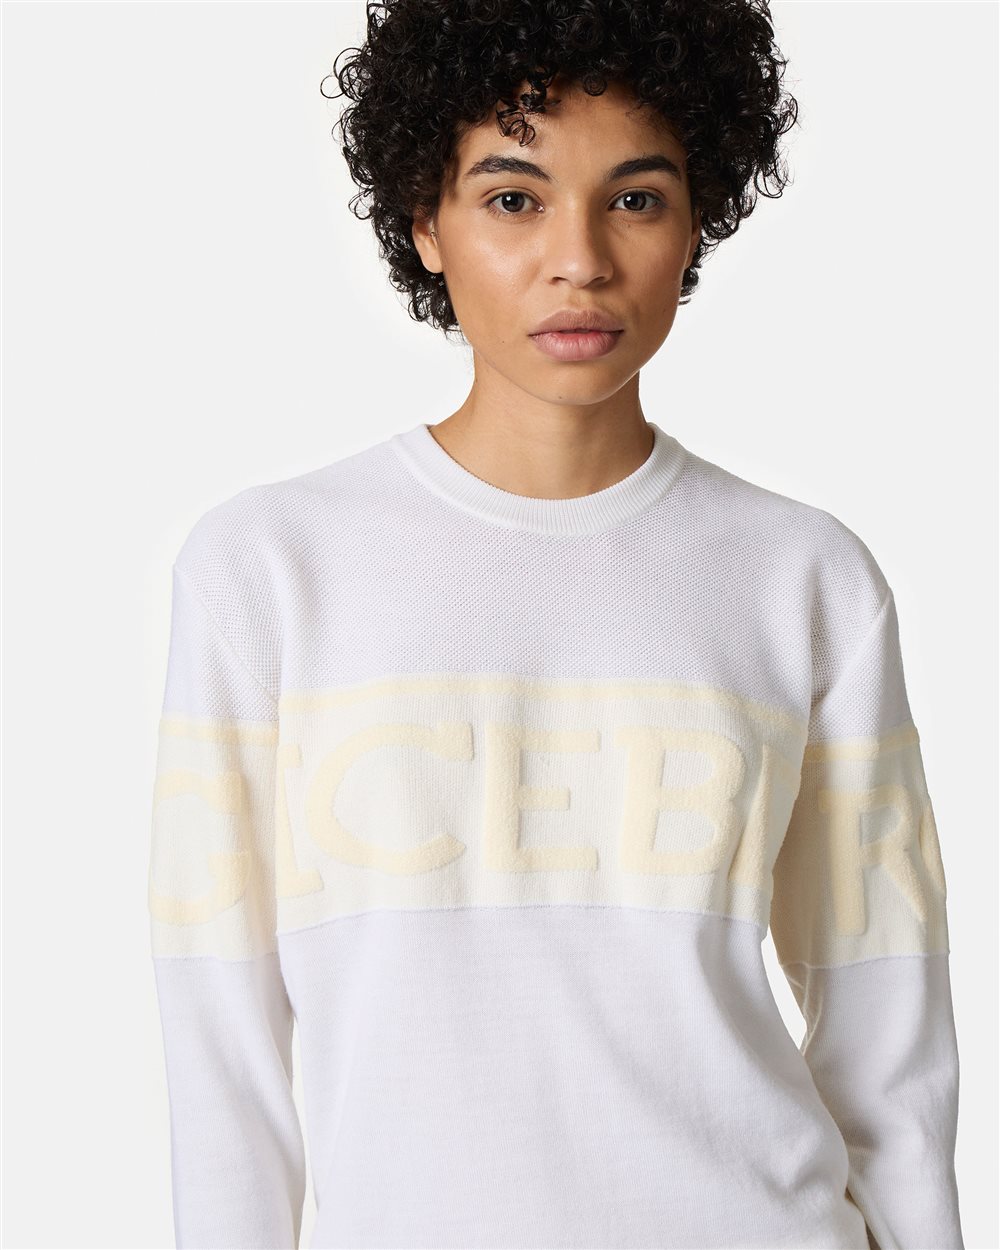 Carry over sweater with logo - Iceberg - Official Website